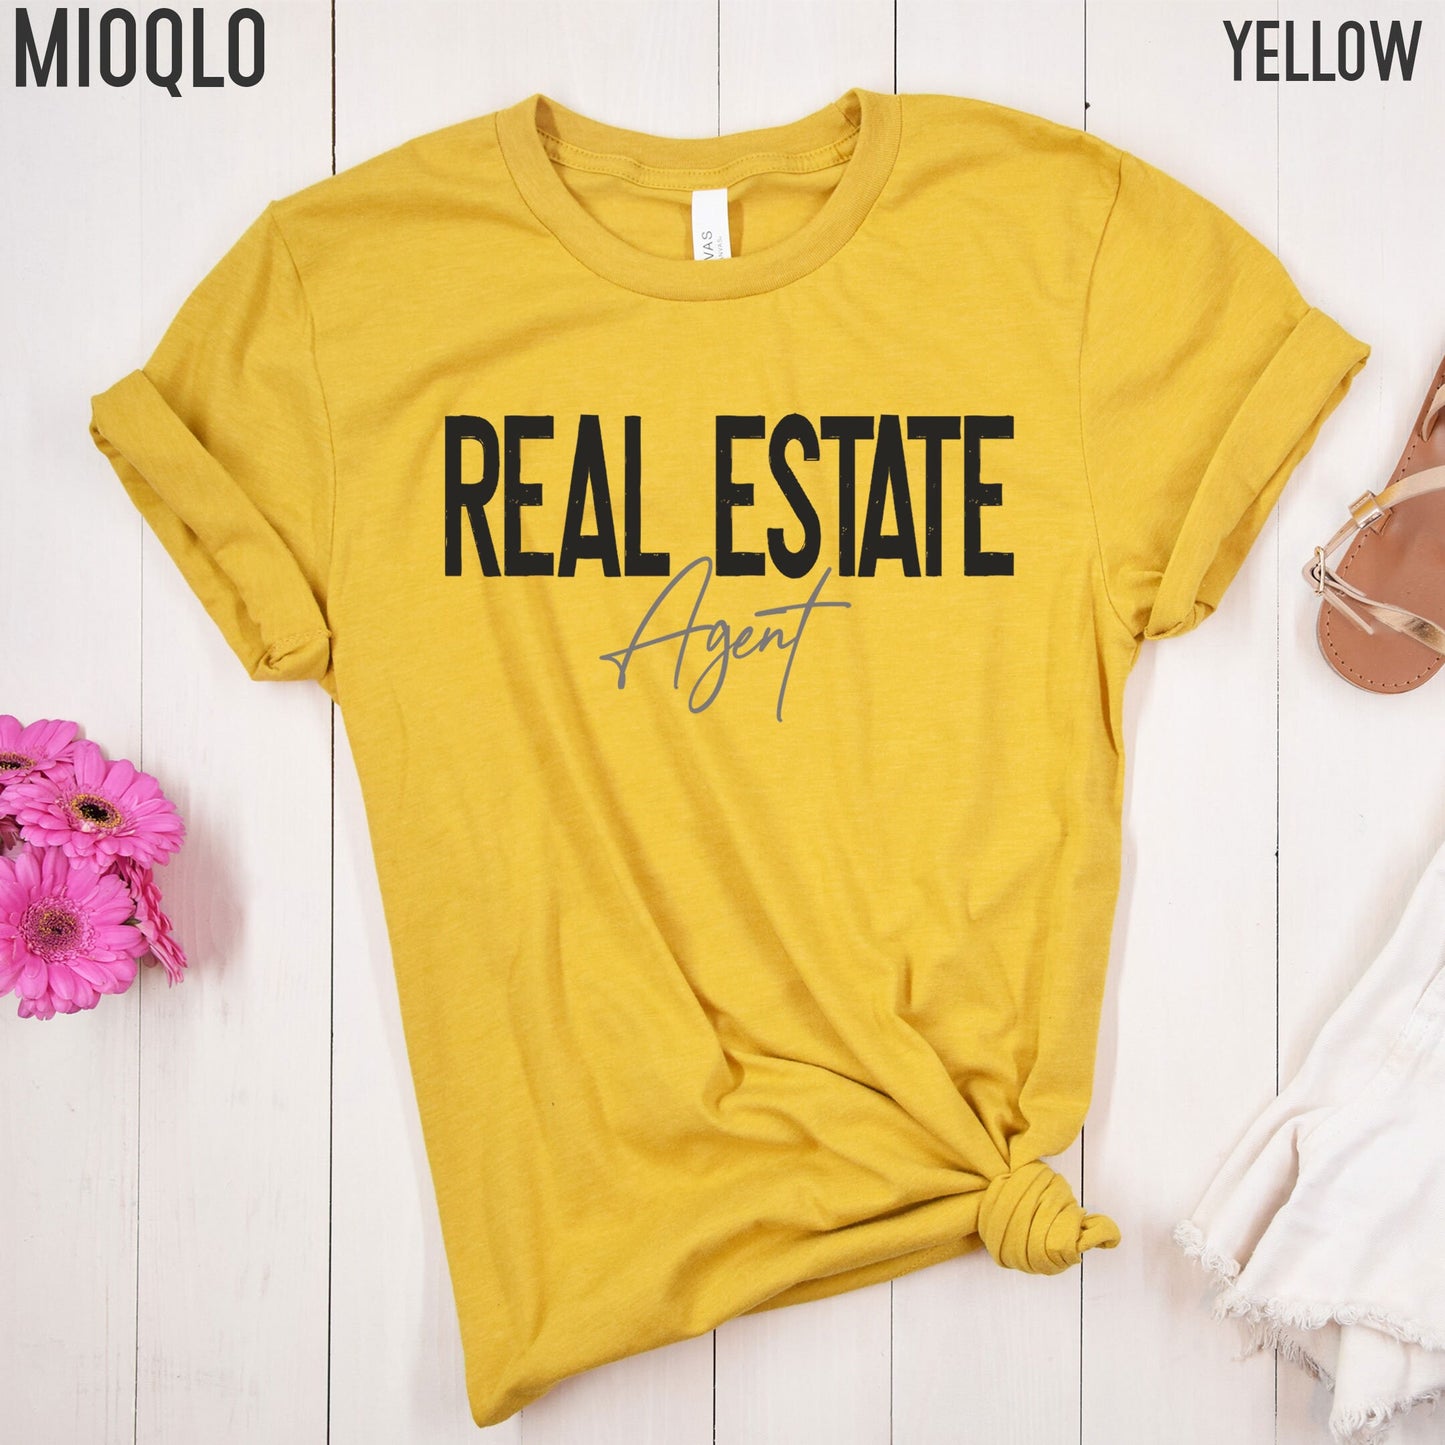 Real Estate Agent Shirt, Real Estate Shirt, Realtor Shirt, Real Estate Life Tee, Ask Me About Mortgage, Real Estate Gift, Licensed to Sell